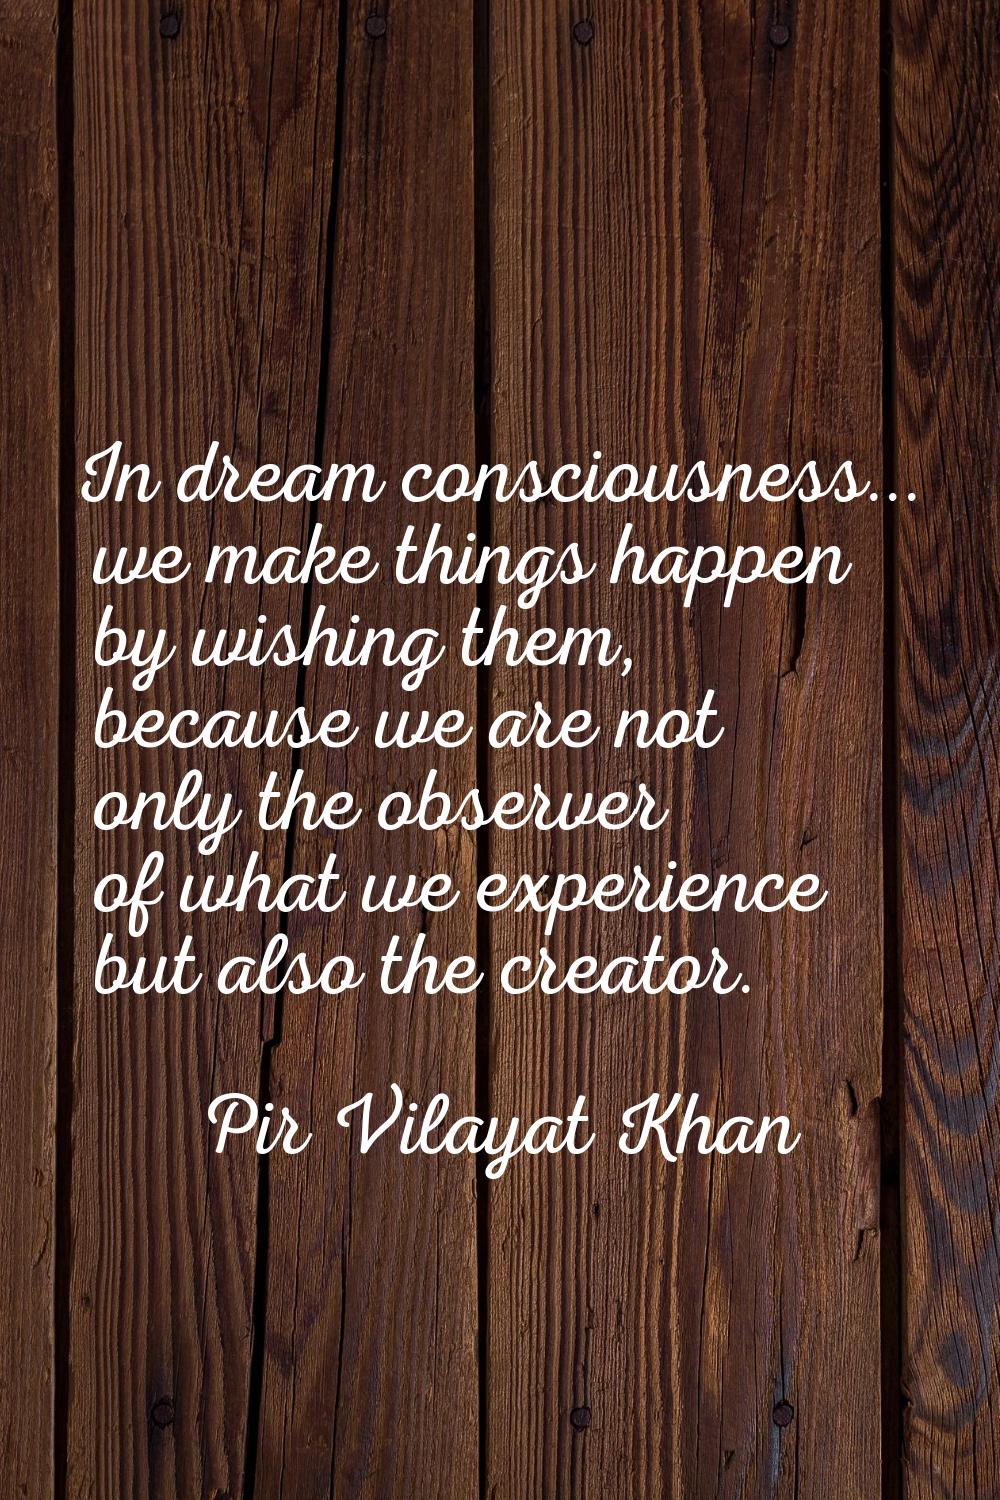 In dream consciousness... we make things happen by wishing them, because we are not only the observ